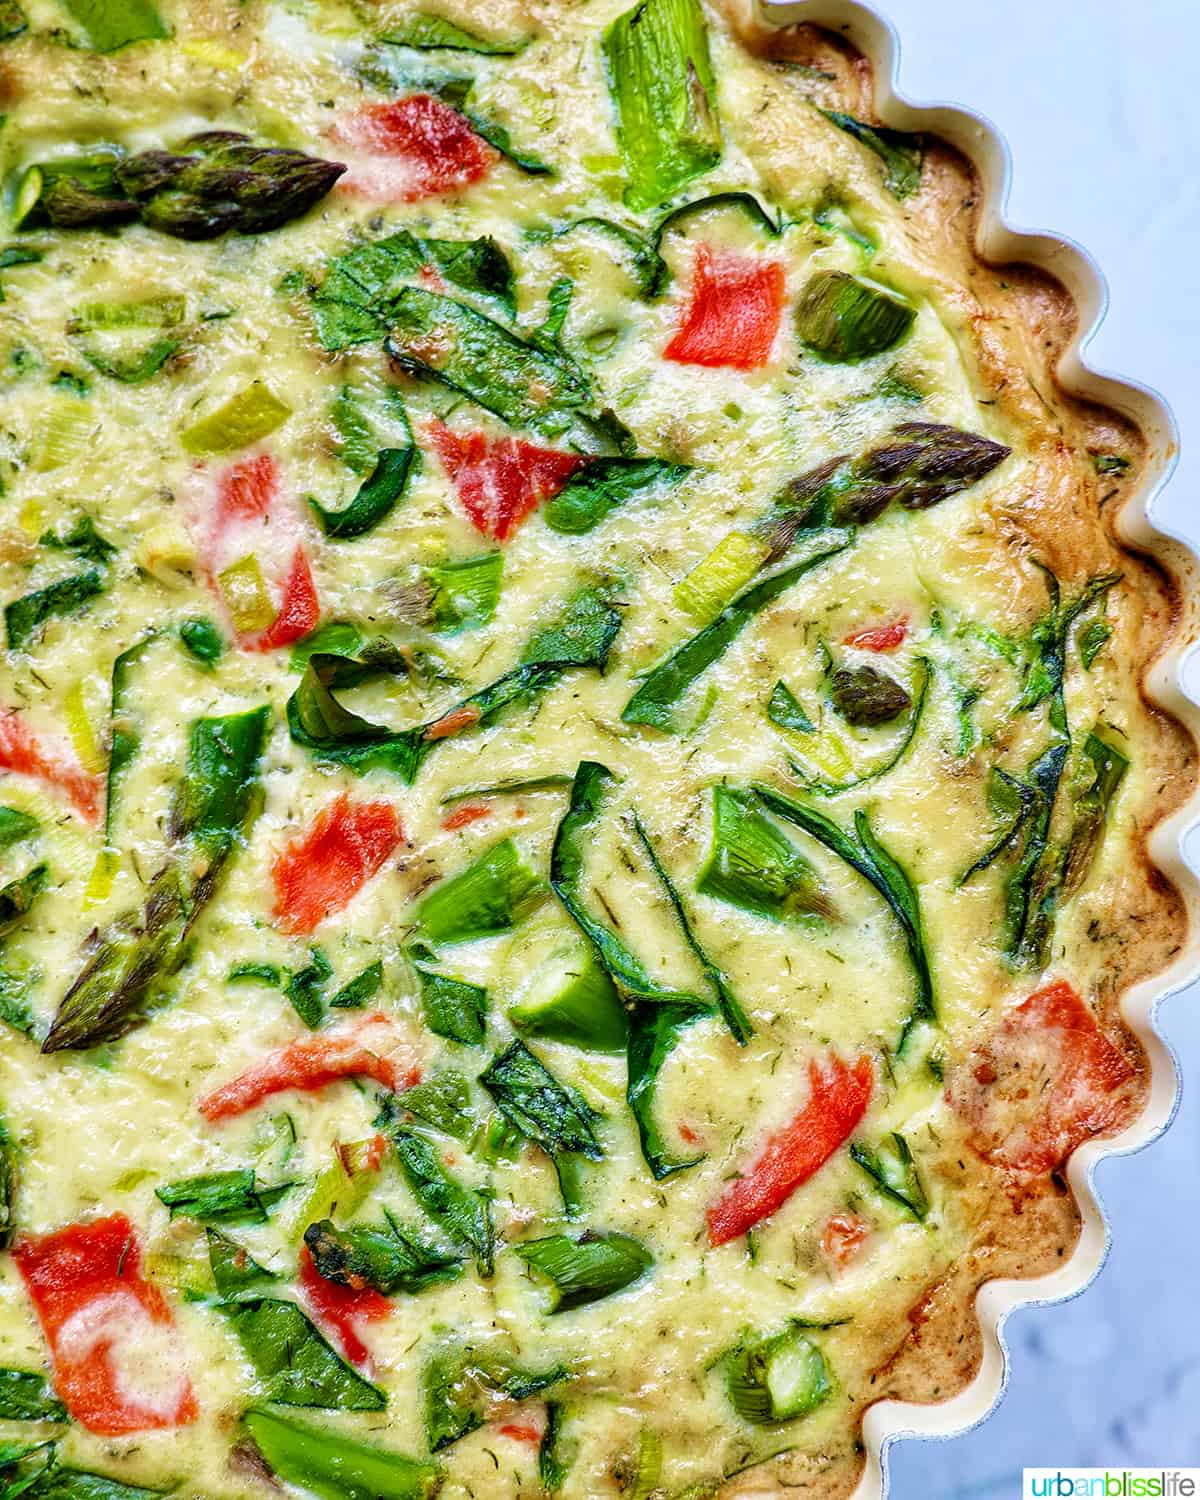 Half of a quiche in a pie pan with salmon, asparagus, and leeks.